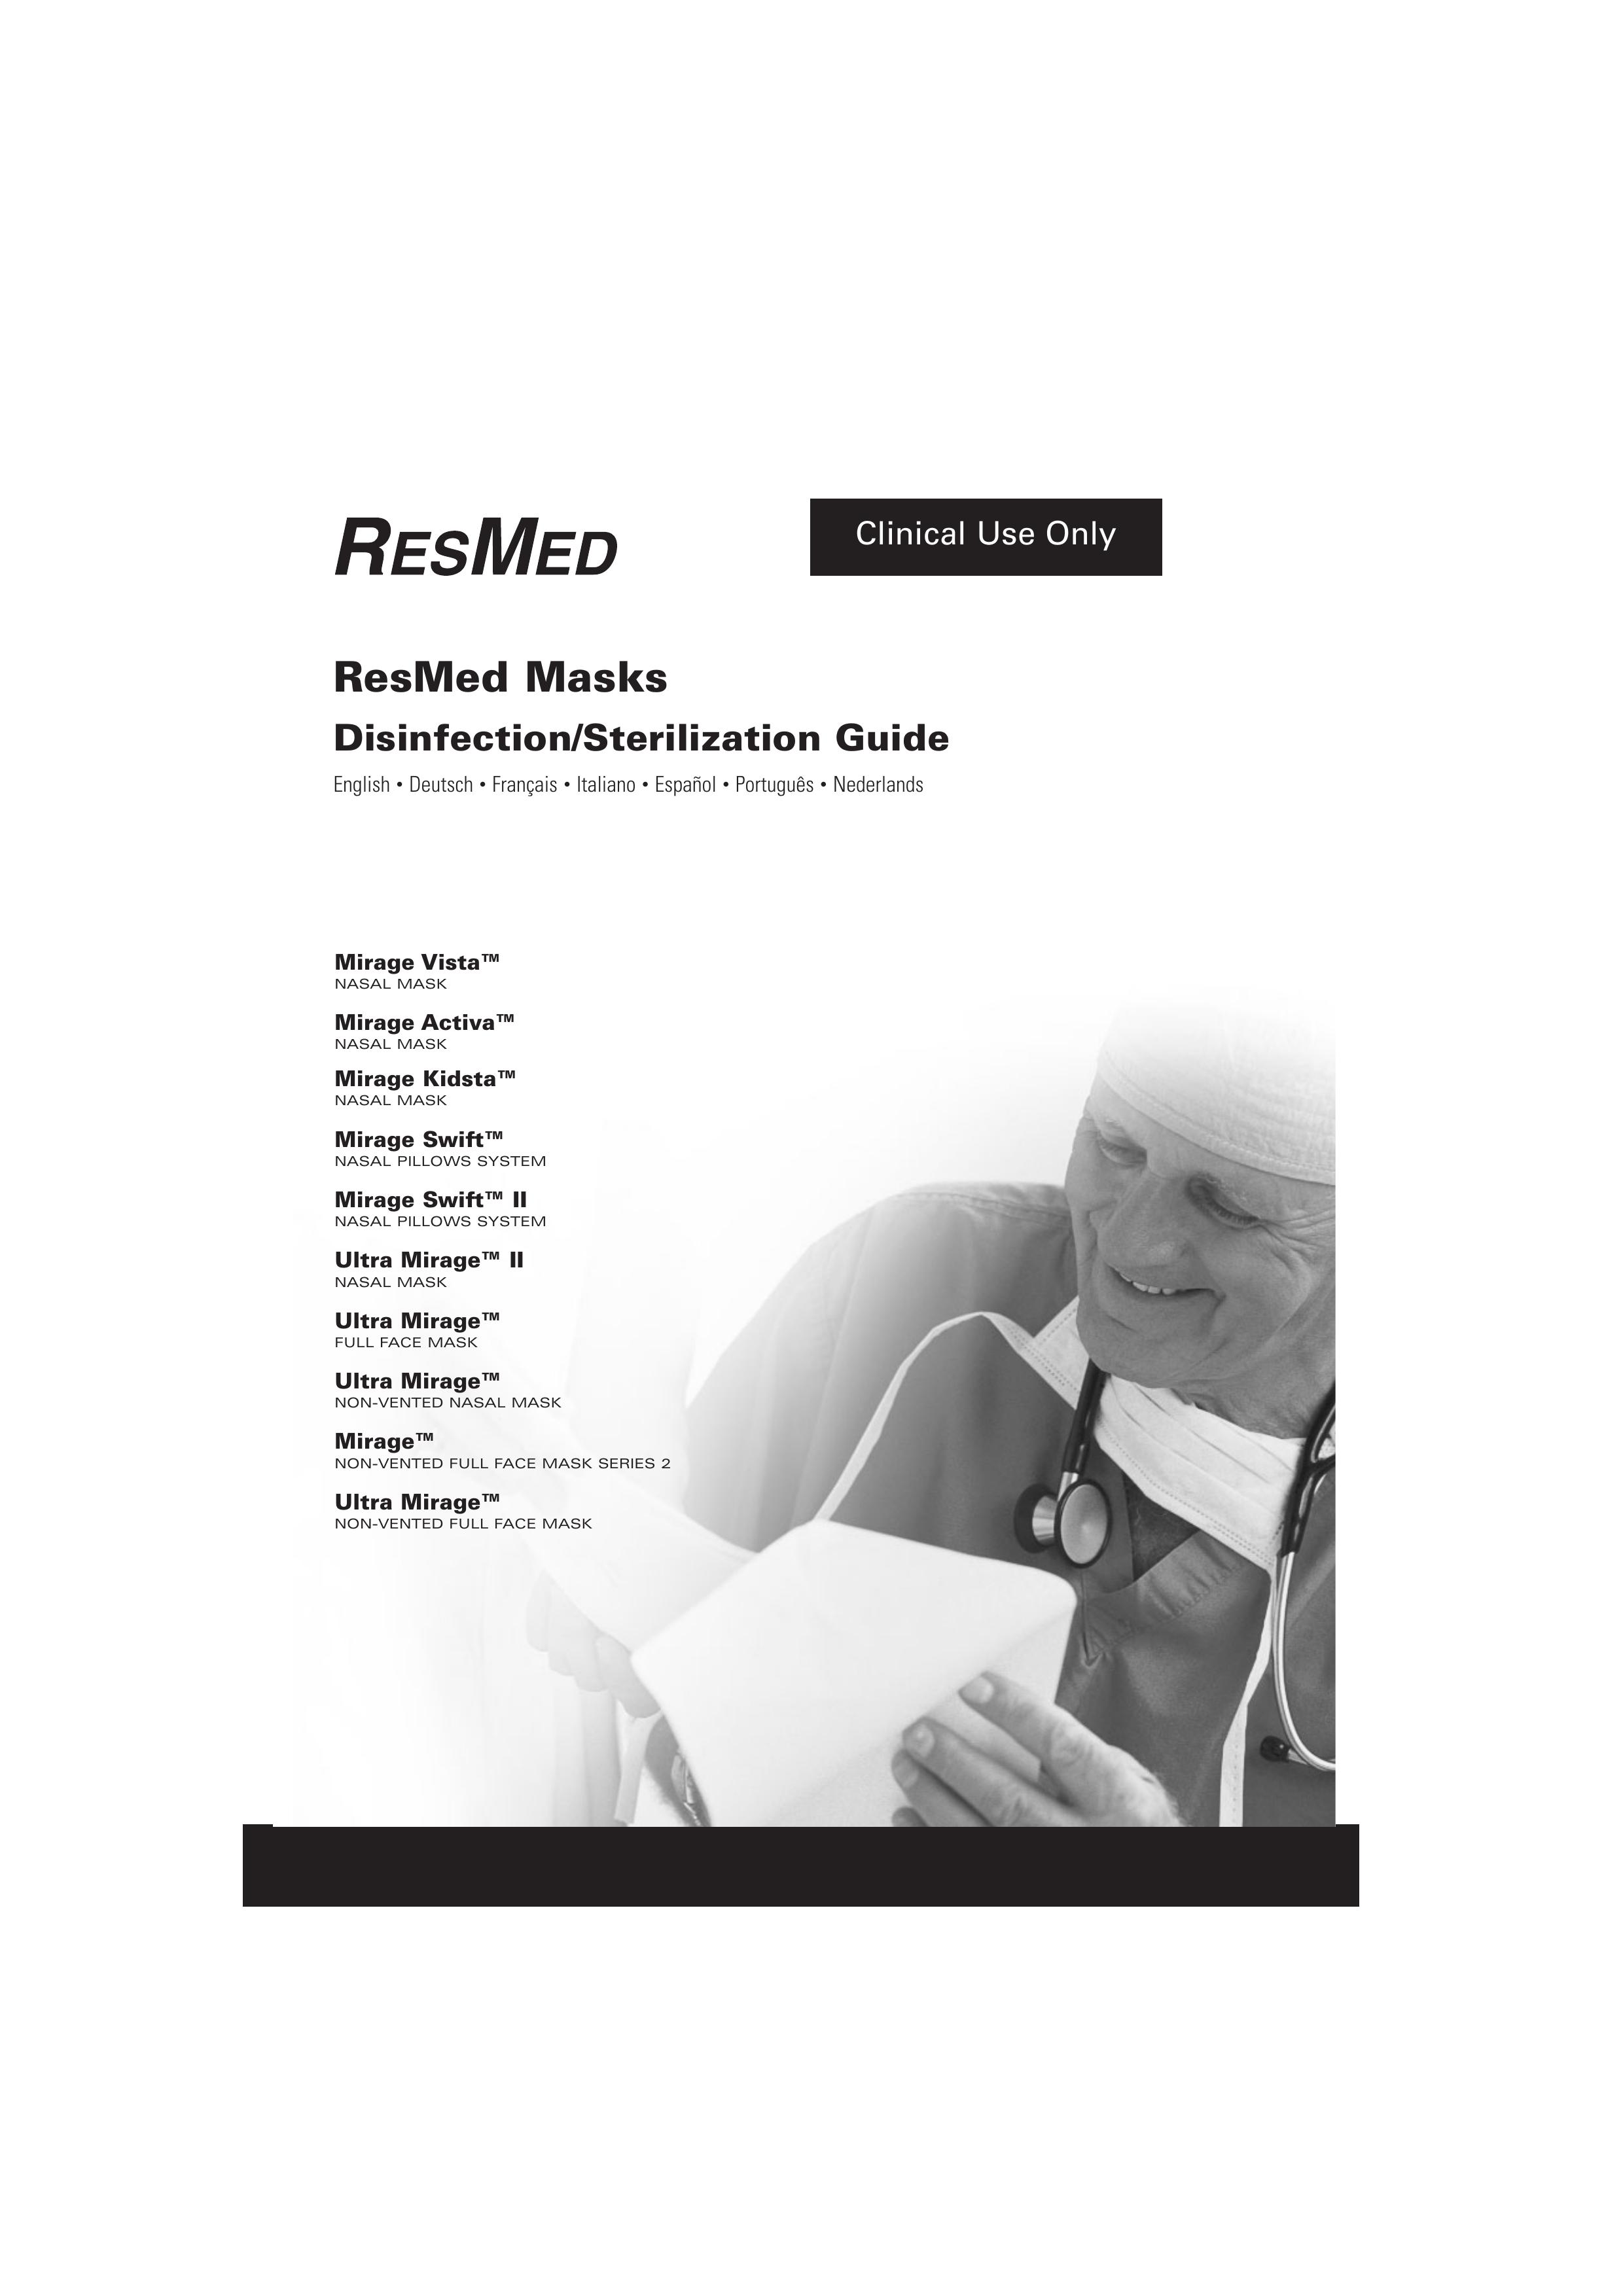 ResMed Mirage Series 2 Respiratory Product User Manual